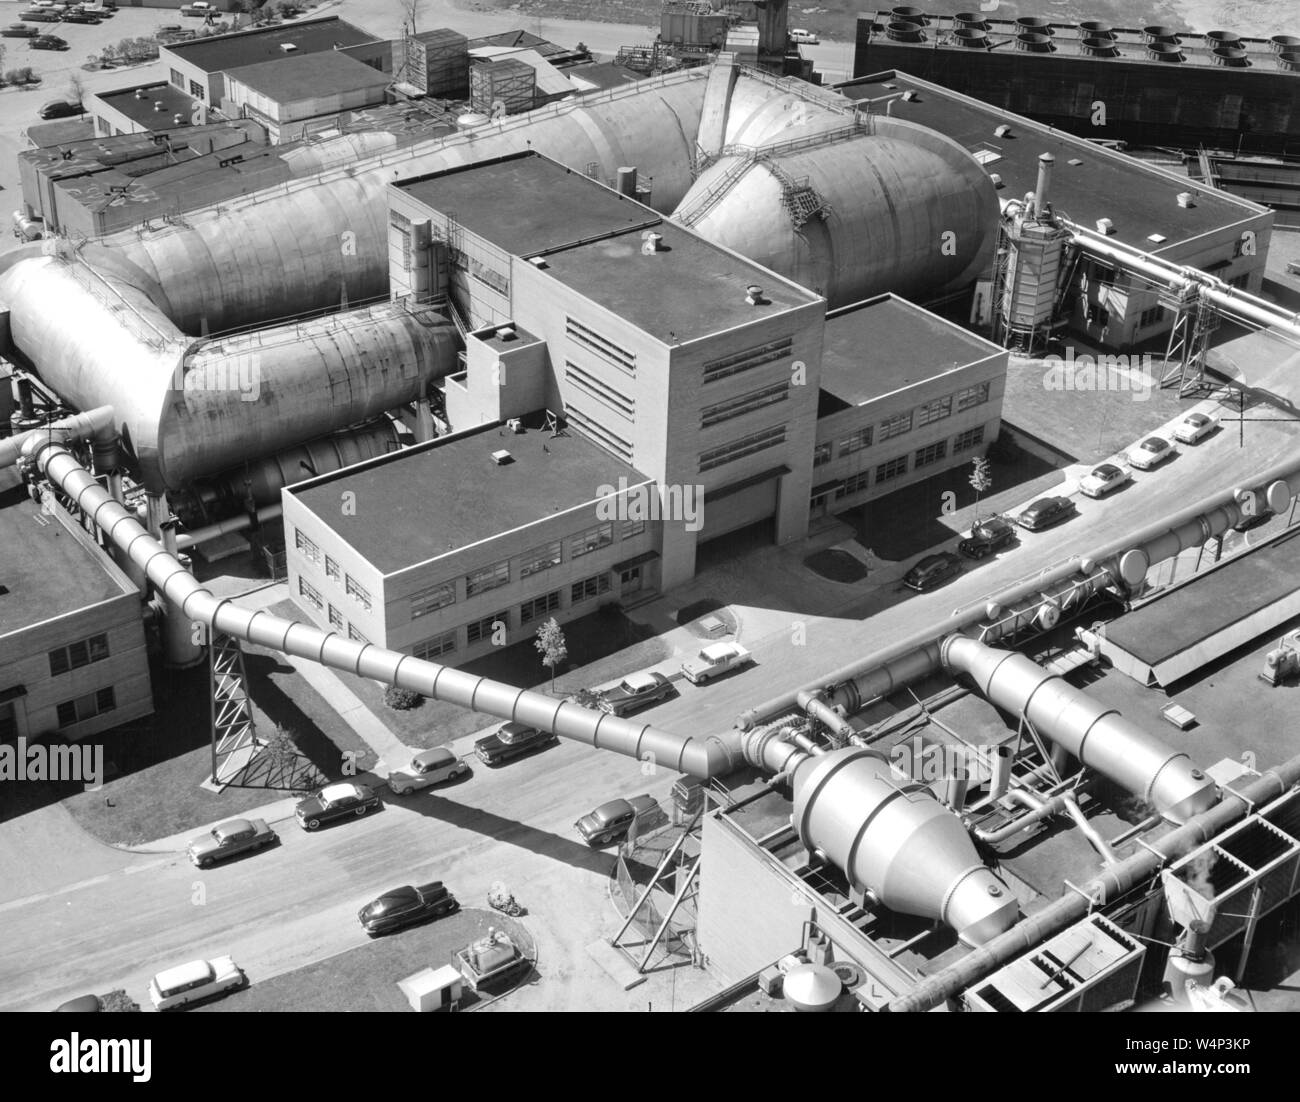 Aerial view of the Altitude Wind Tunnel showing the tunnel and its connections, John H. Glenn Research Center at Lewis Field, Cleveland, Ohio, 1955. Image courtesy National Aeronautics and Space Administration (NASA). () Stock Photo